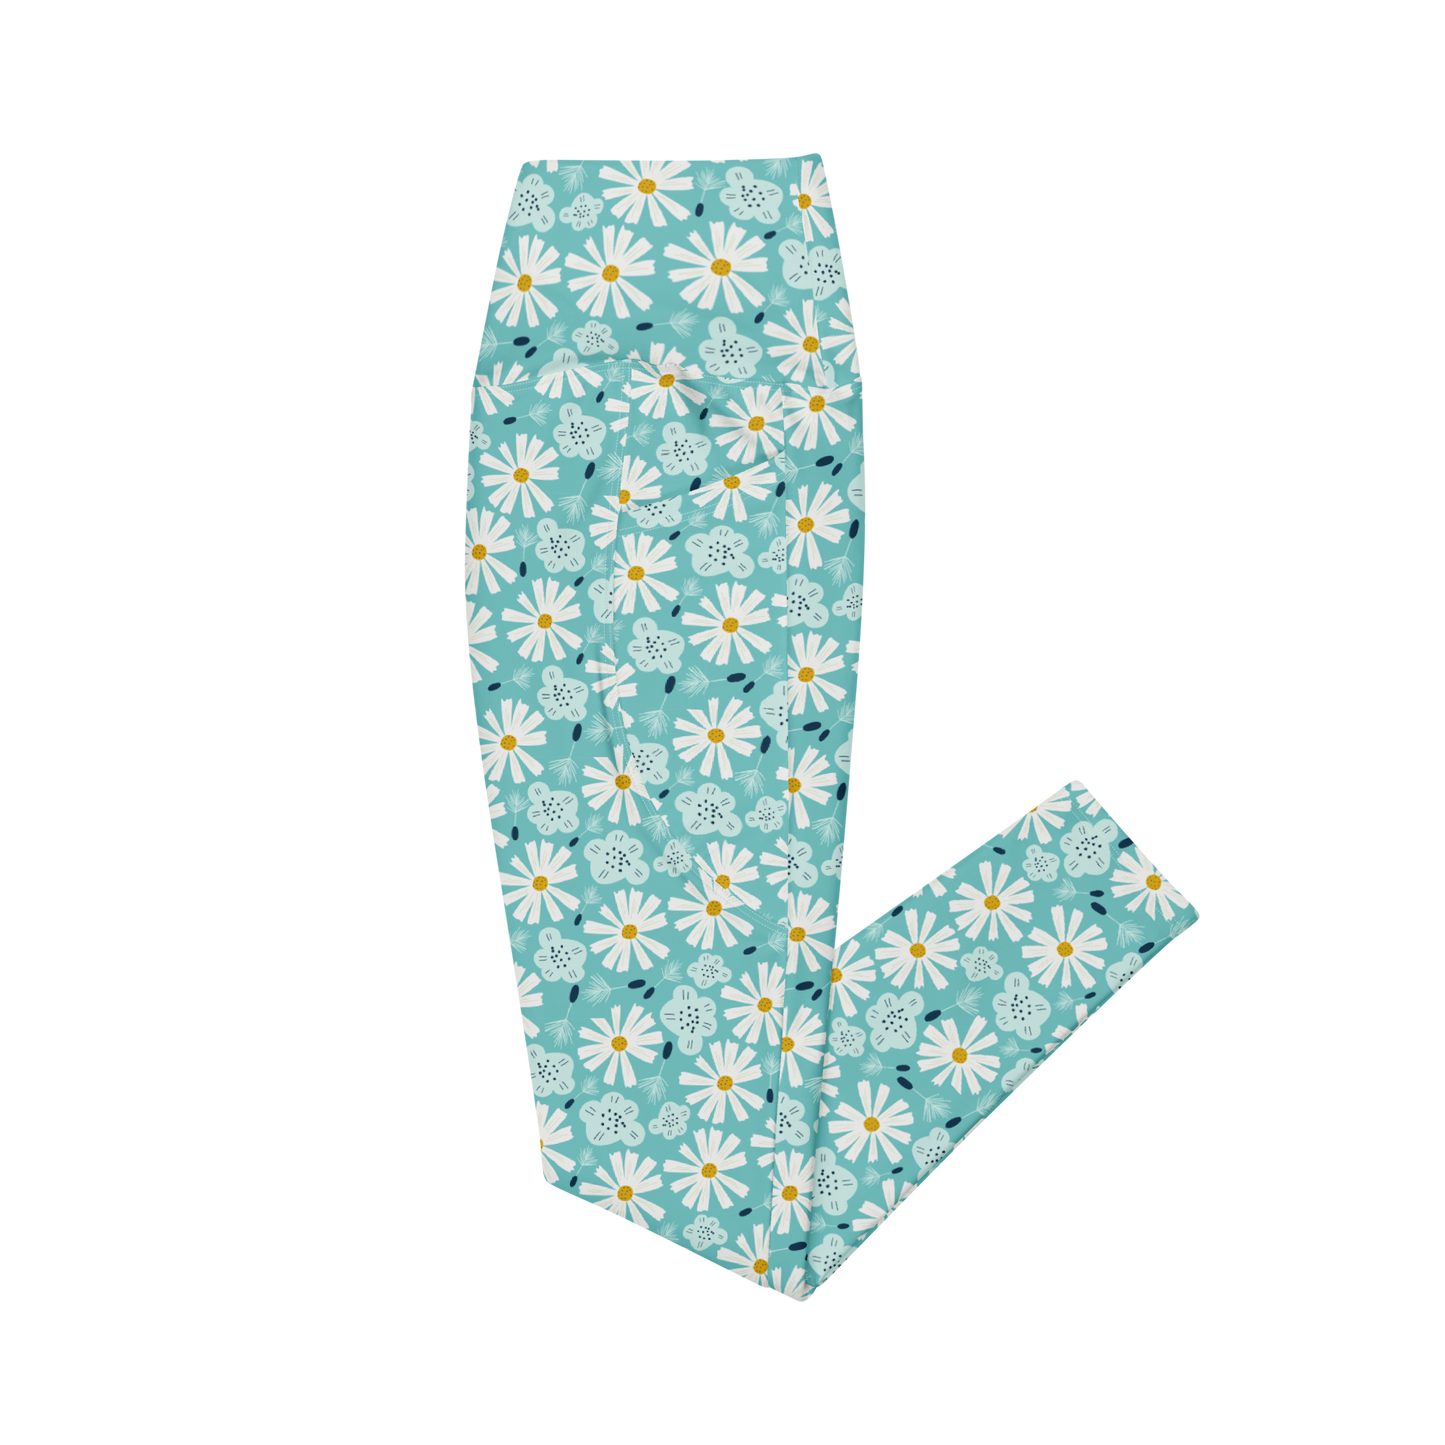 Scandinavian Spring Floral | Seamless Patterns | All-Over Print Leggings with Pockets - #10